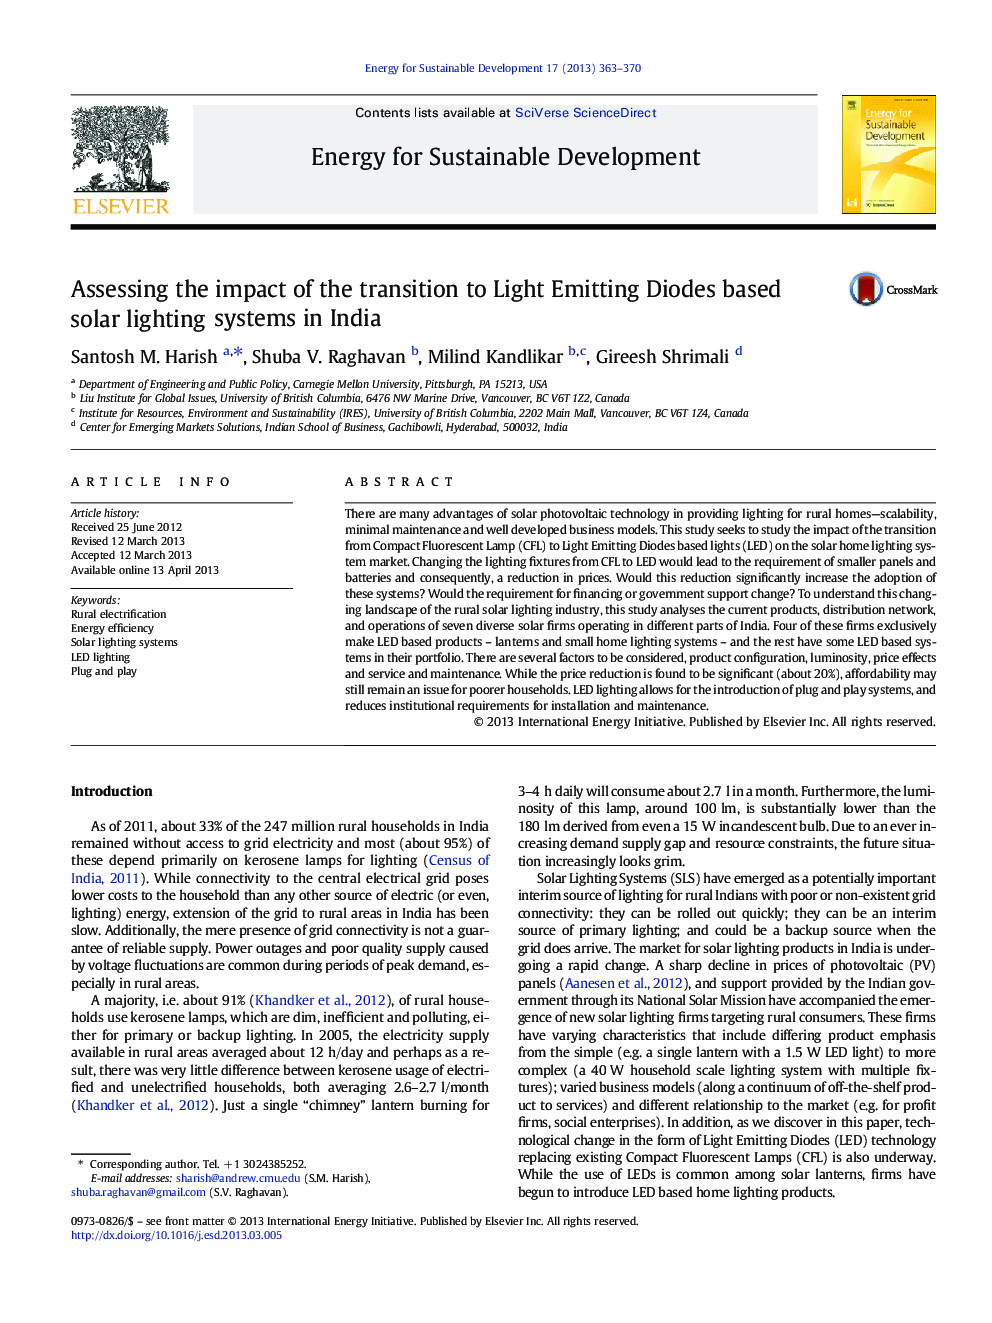 Assessing the impact of the transition to Light Emitting Diodes based solar lighting systems in India